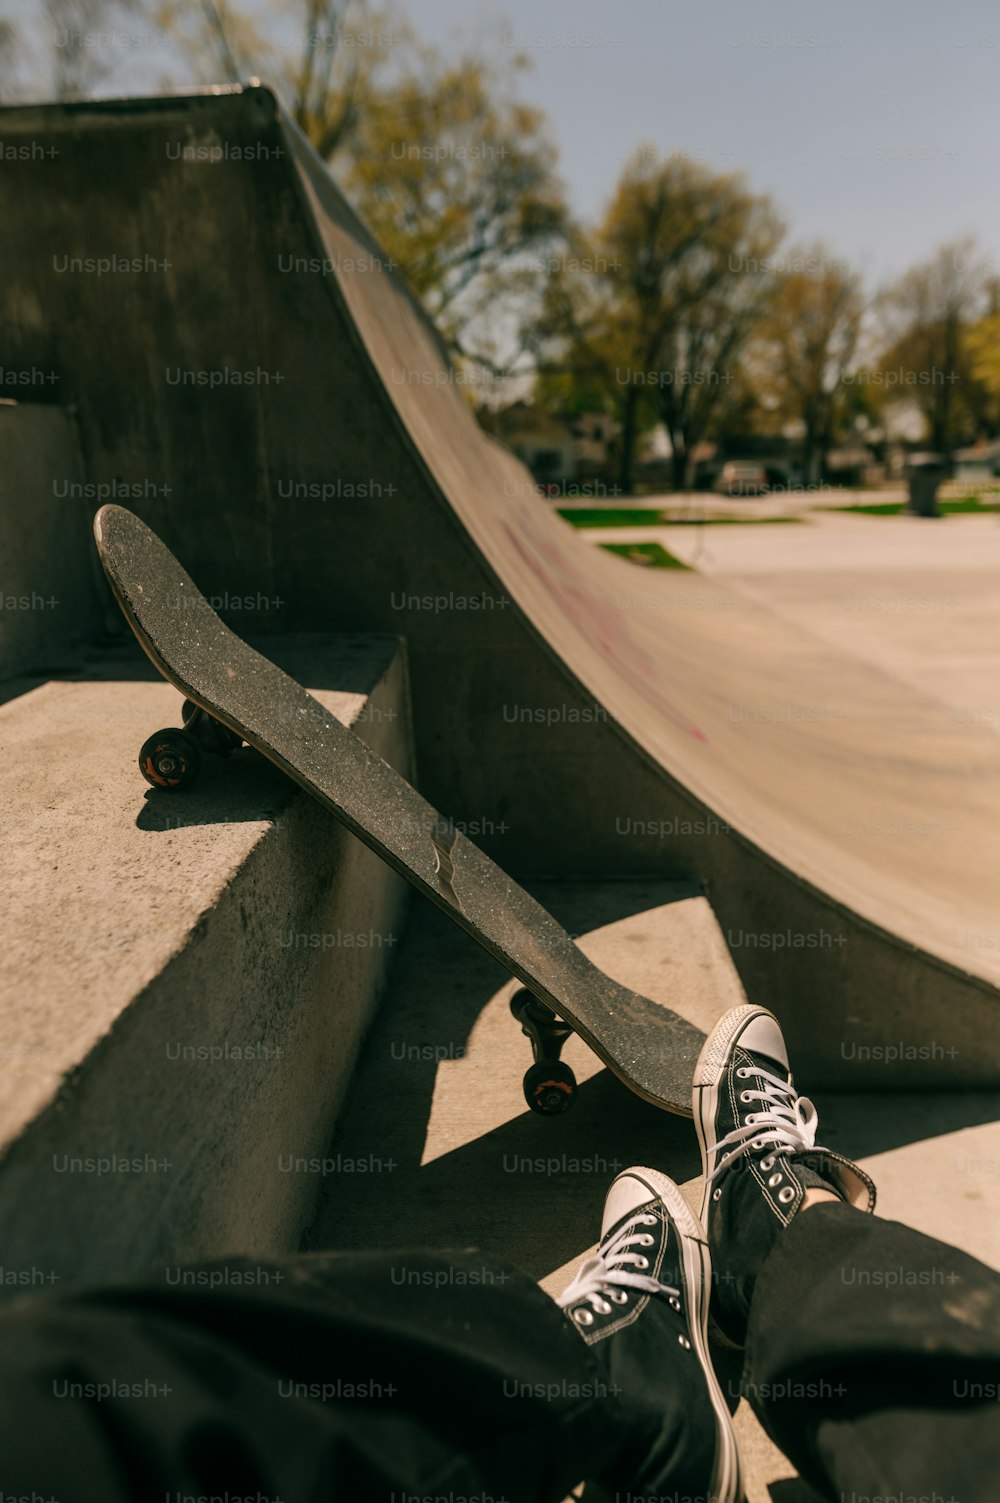 a person with their feet on a skateboard at a skate park